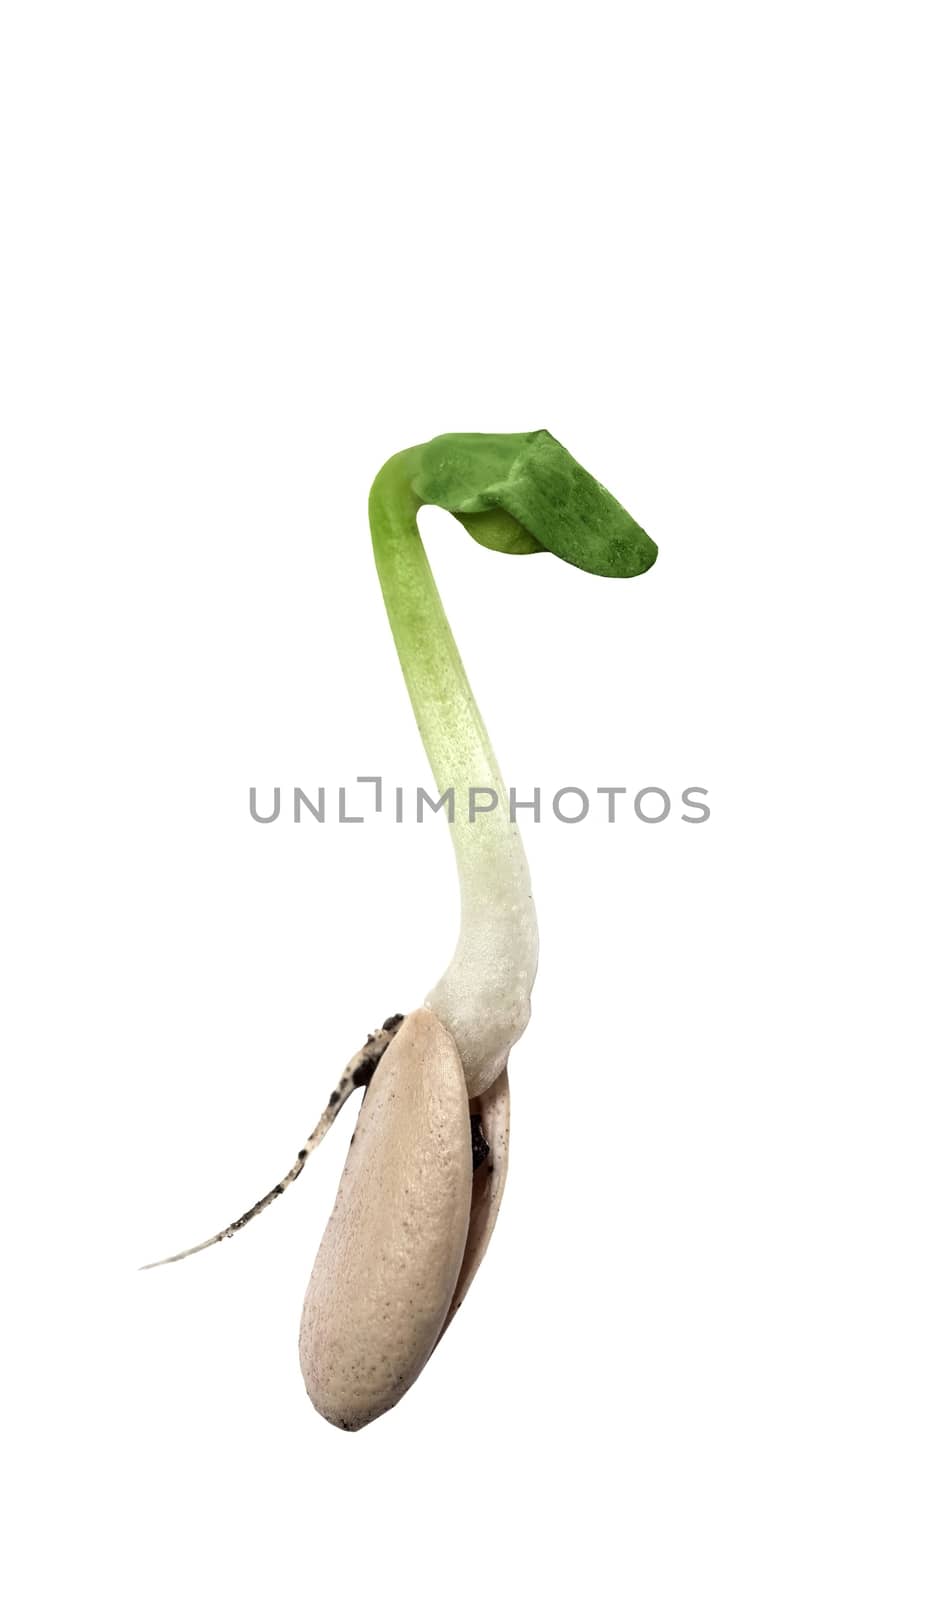 Macro shot of a small green seedling isolated on white background showing small root.